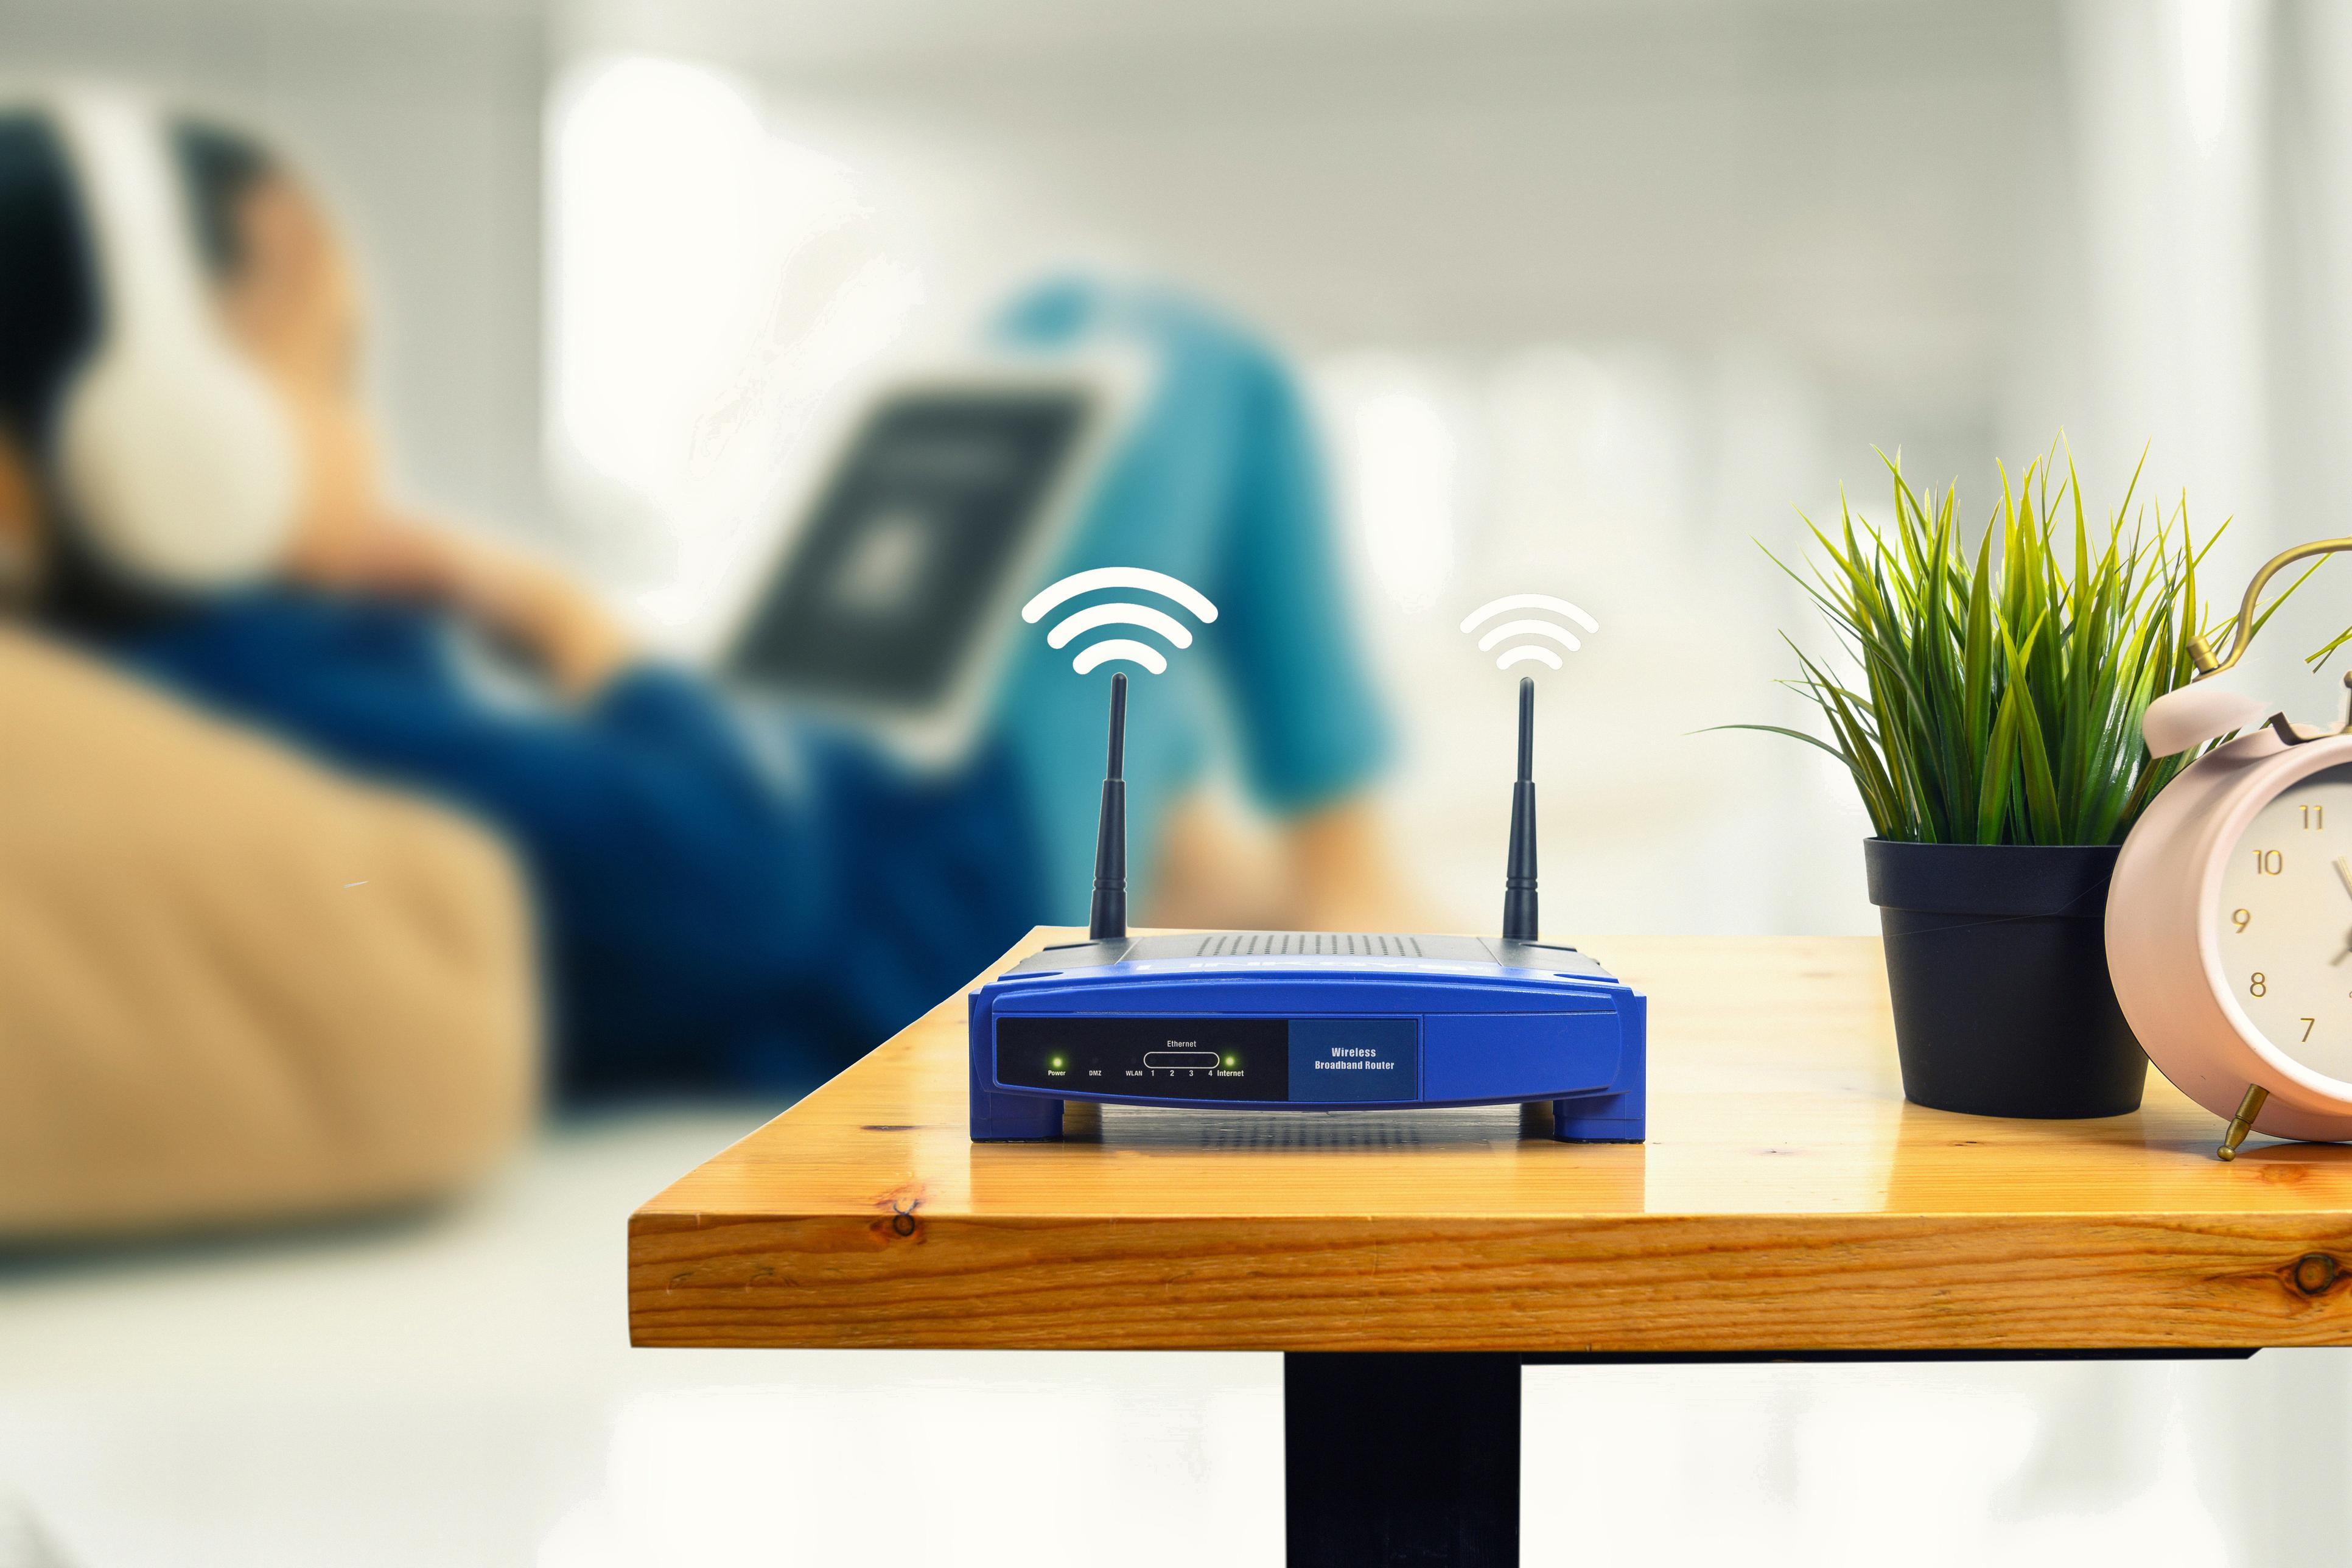 How to Get Wifi Without Internet Provider? 9